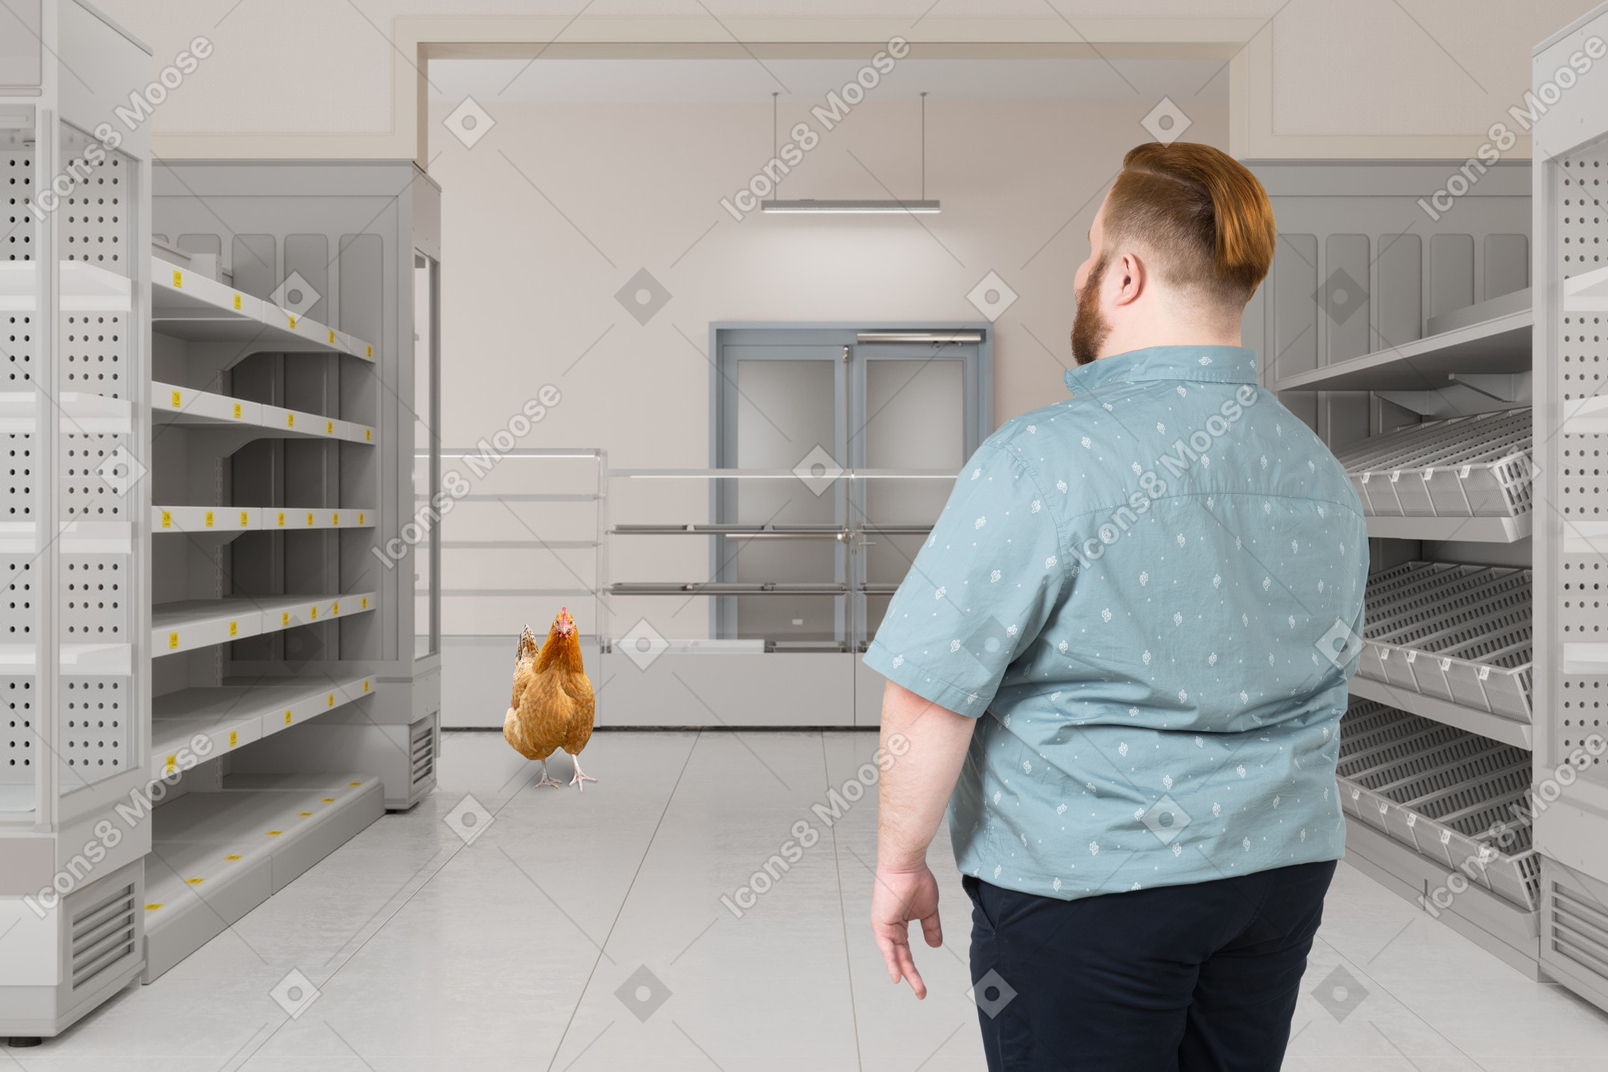 Man standing in an empty grocery isle looking at rooster